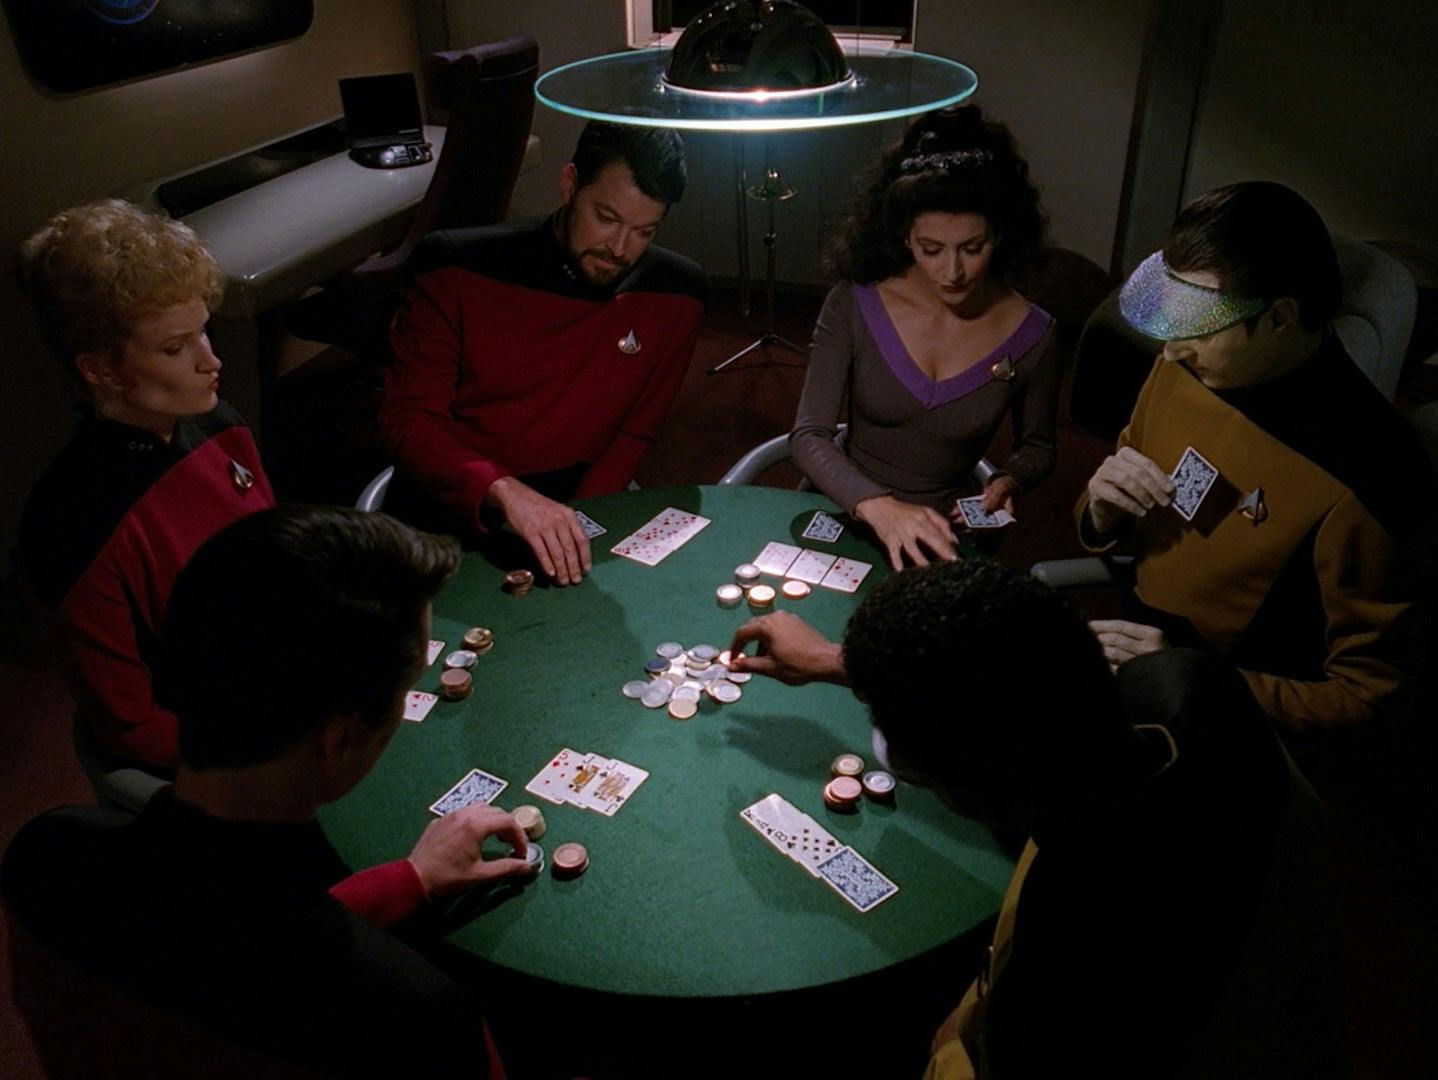 Shelby joins the Riker, Deanna Troi, Data, Geordi La Forge, and Wesley Crusher for a game of poker in crew quarters on the Enterprise in 'The Best of Both Worlds, Part I'